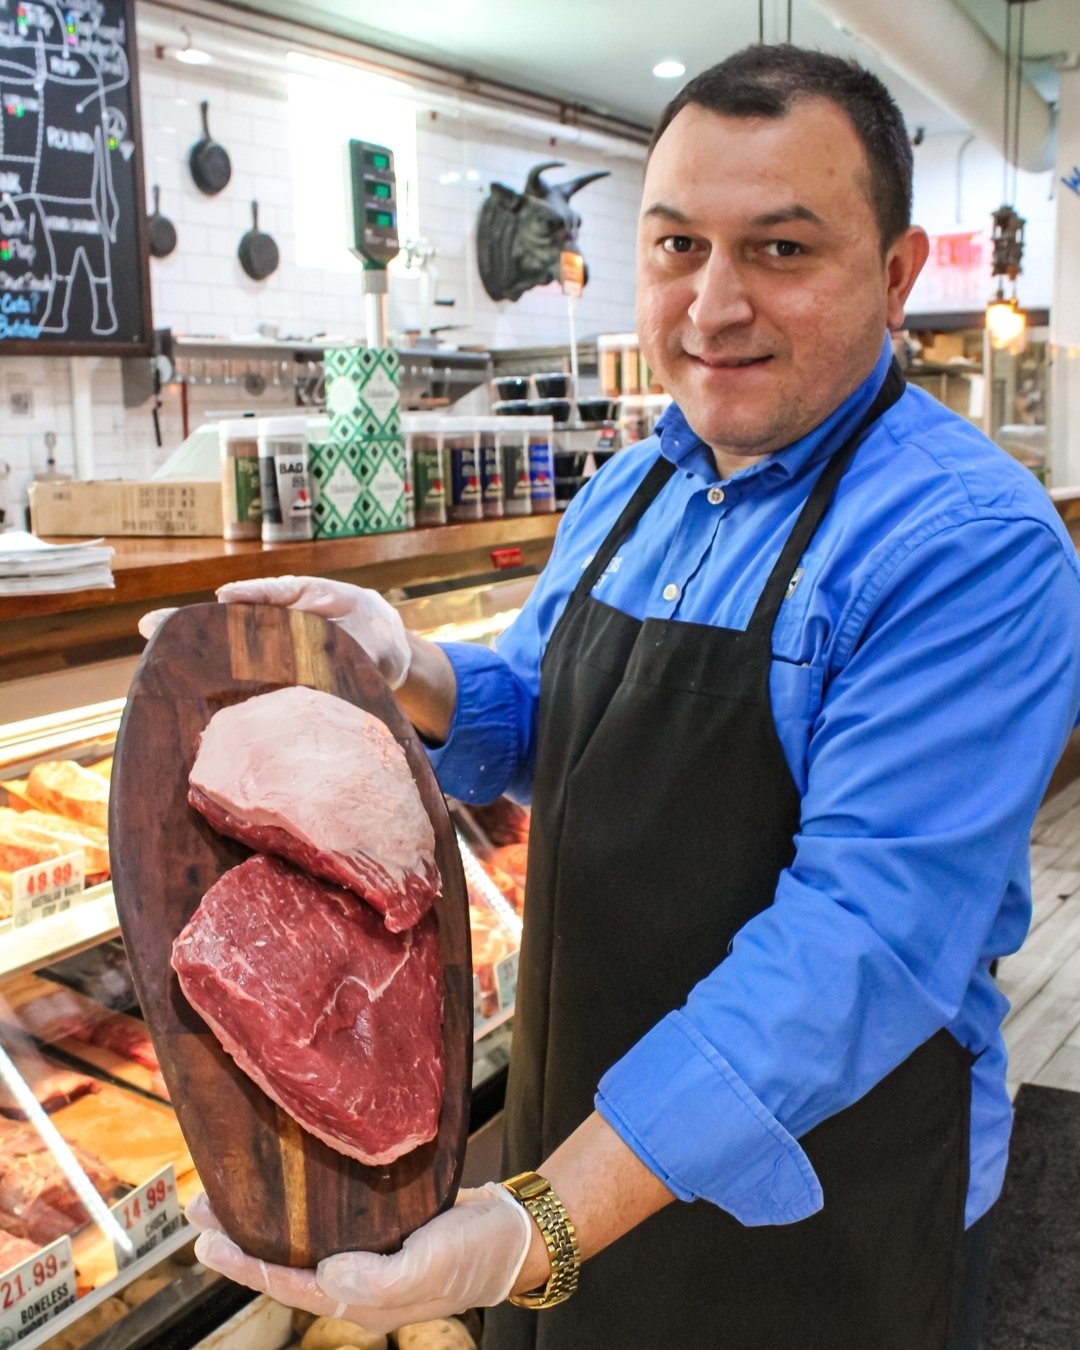 Alex has another great cut for the grill this week! 

Meet Picanha. Picanha is a cut of steak, popular in Brazil, also known as a sirloin cap. It's rich, flavorful and easy to cook on the grill. Ask Alex how to season and grill while you're in store.